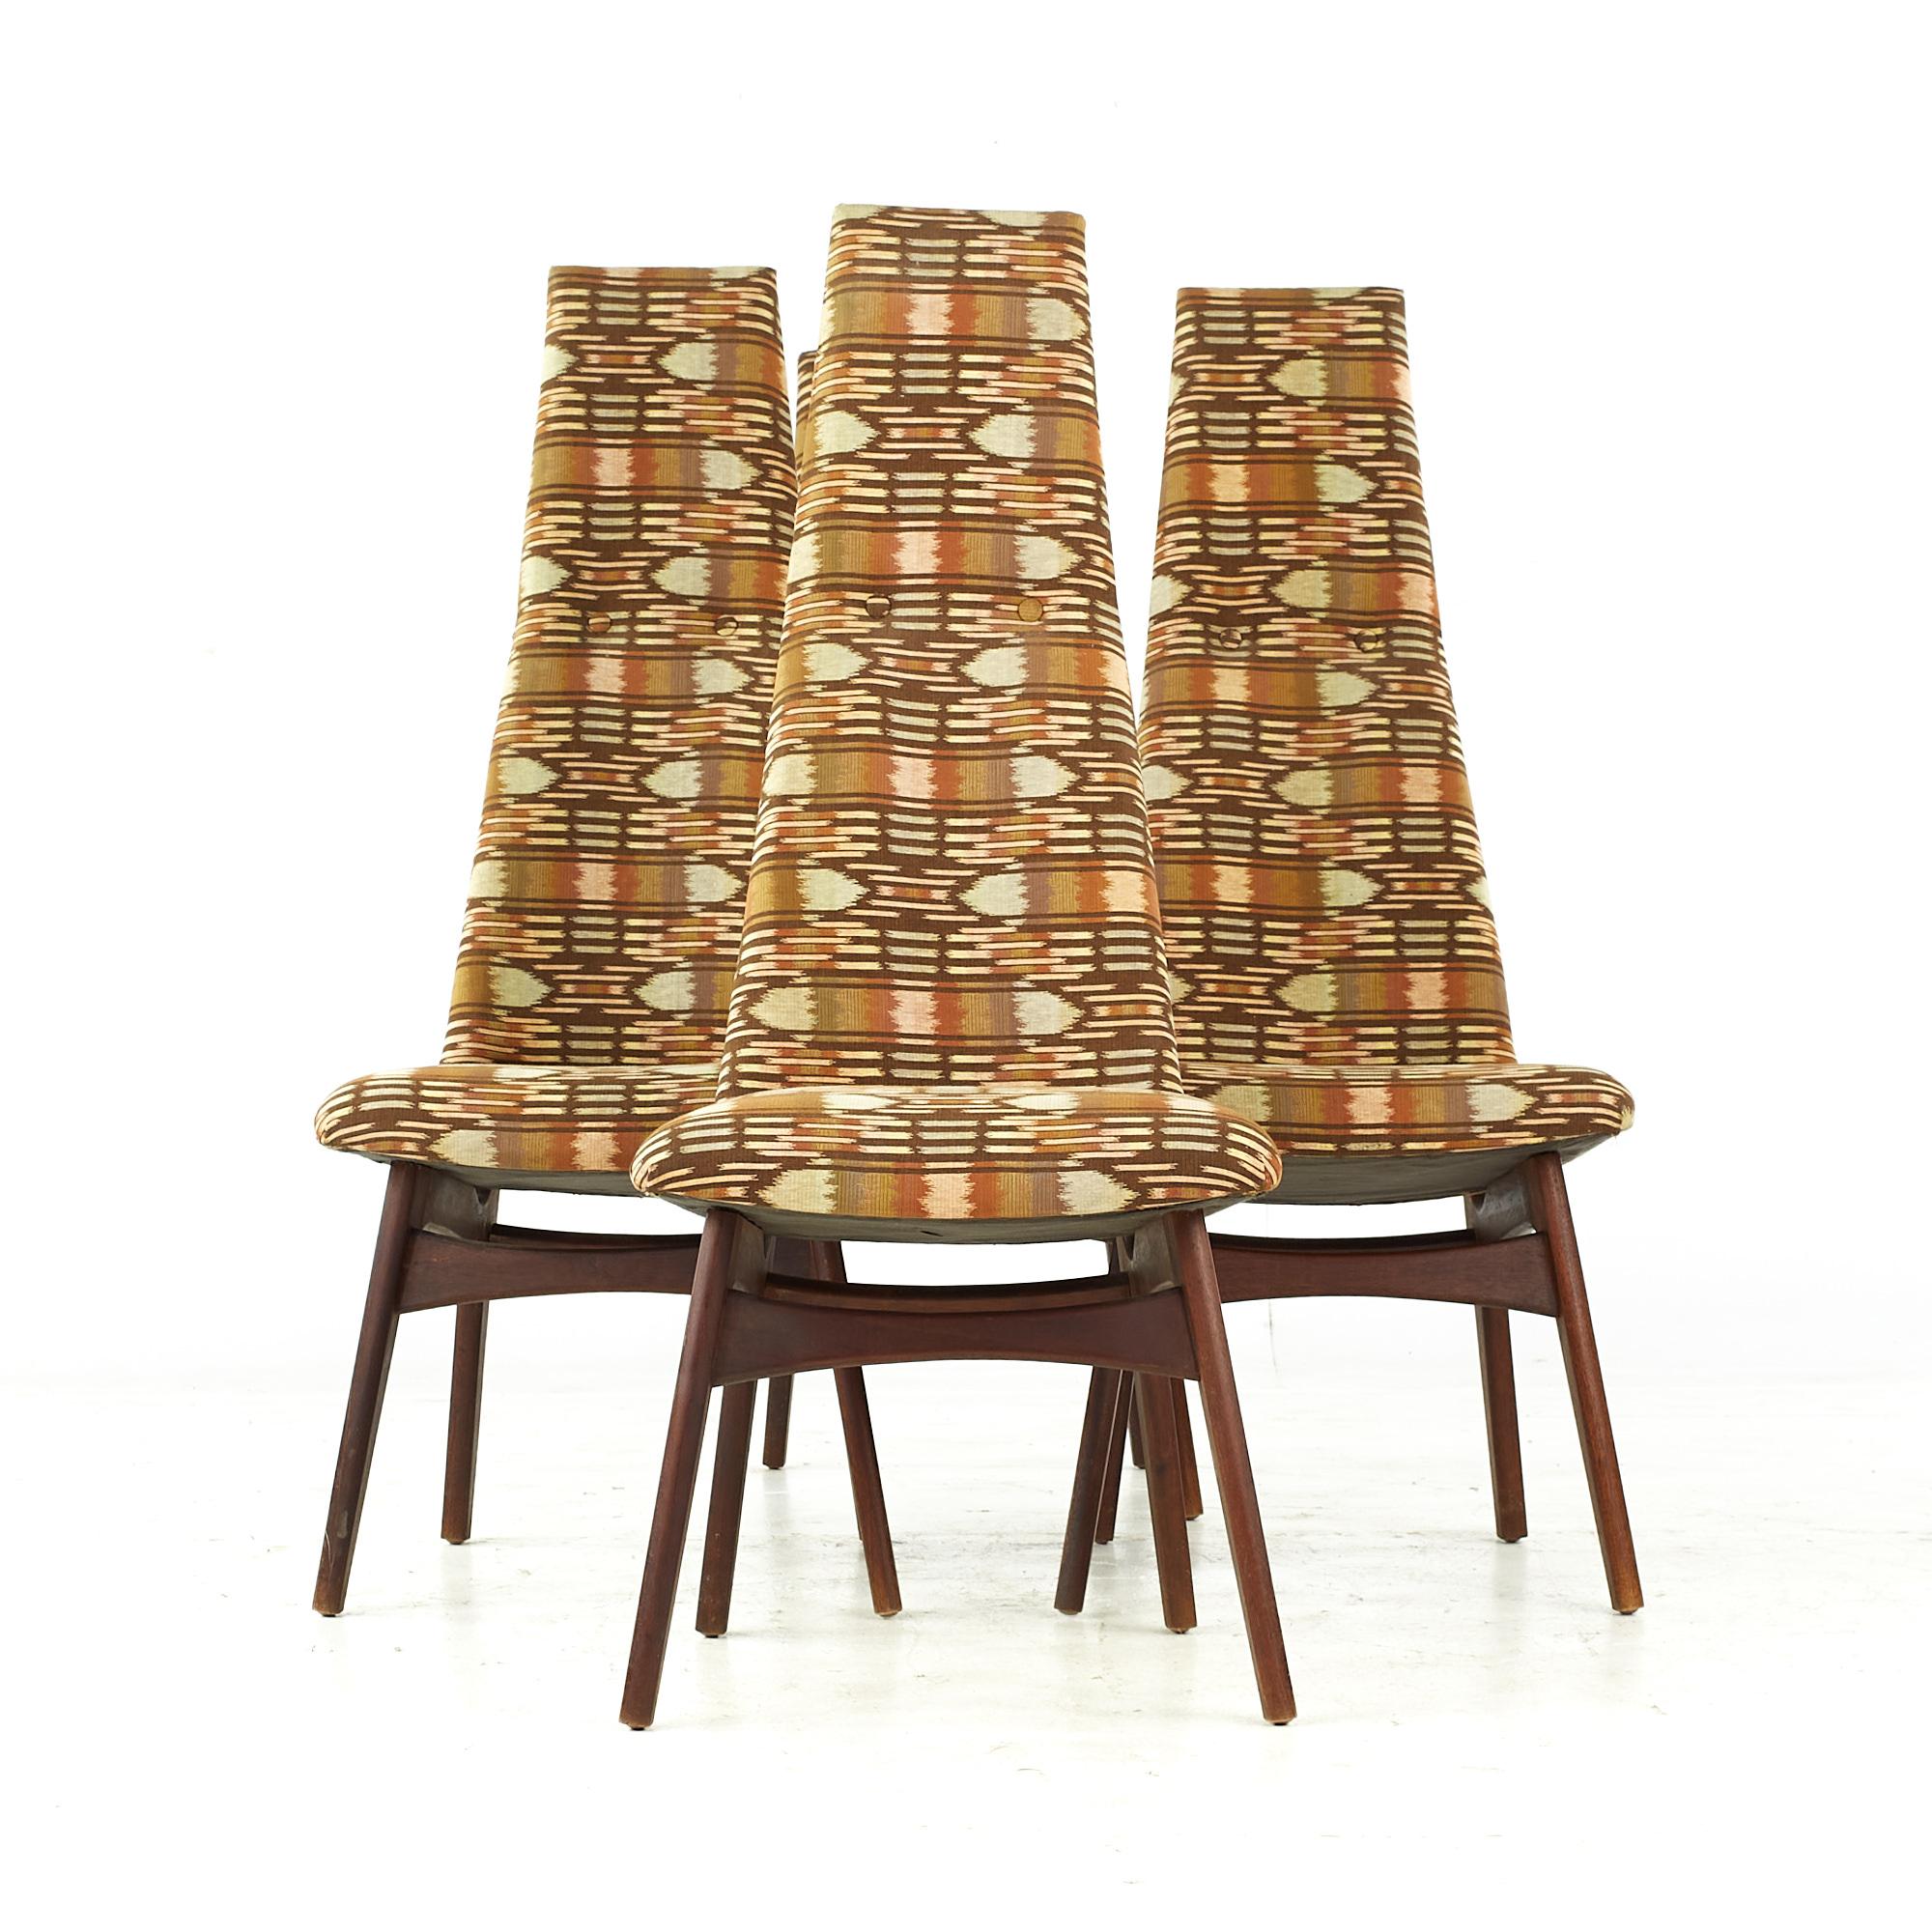 Adrian pearsall for craft associates midcentury 1613-C walnut highback dining chairs - Set of 4.

Each chair measures: 19 wide x 18 deep x 47.5 inches high, with a seat height/chair clearance of 18.5 inches.

All pieces of furniture can be had